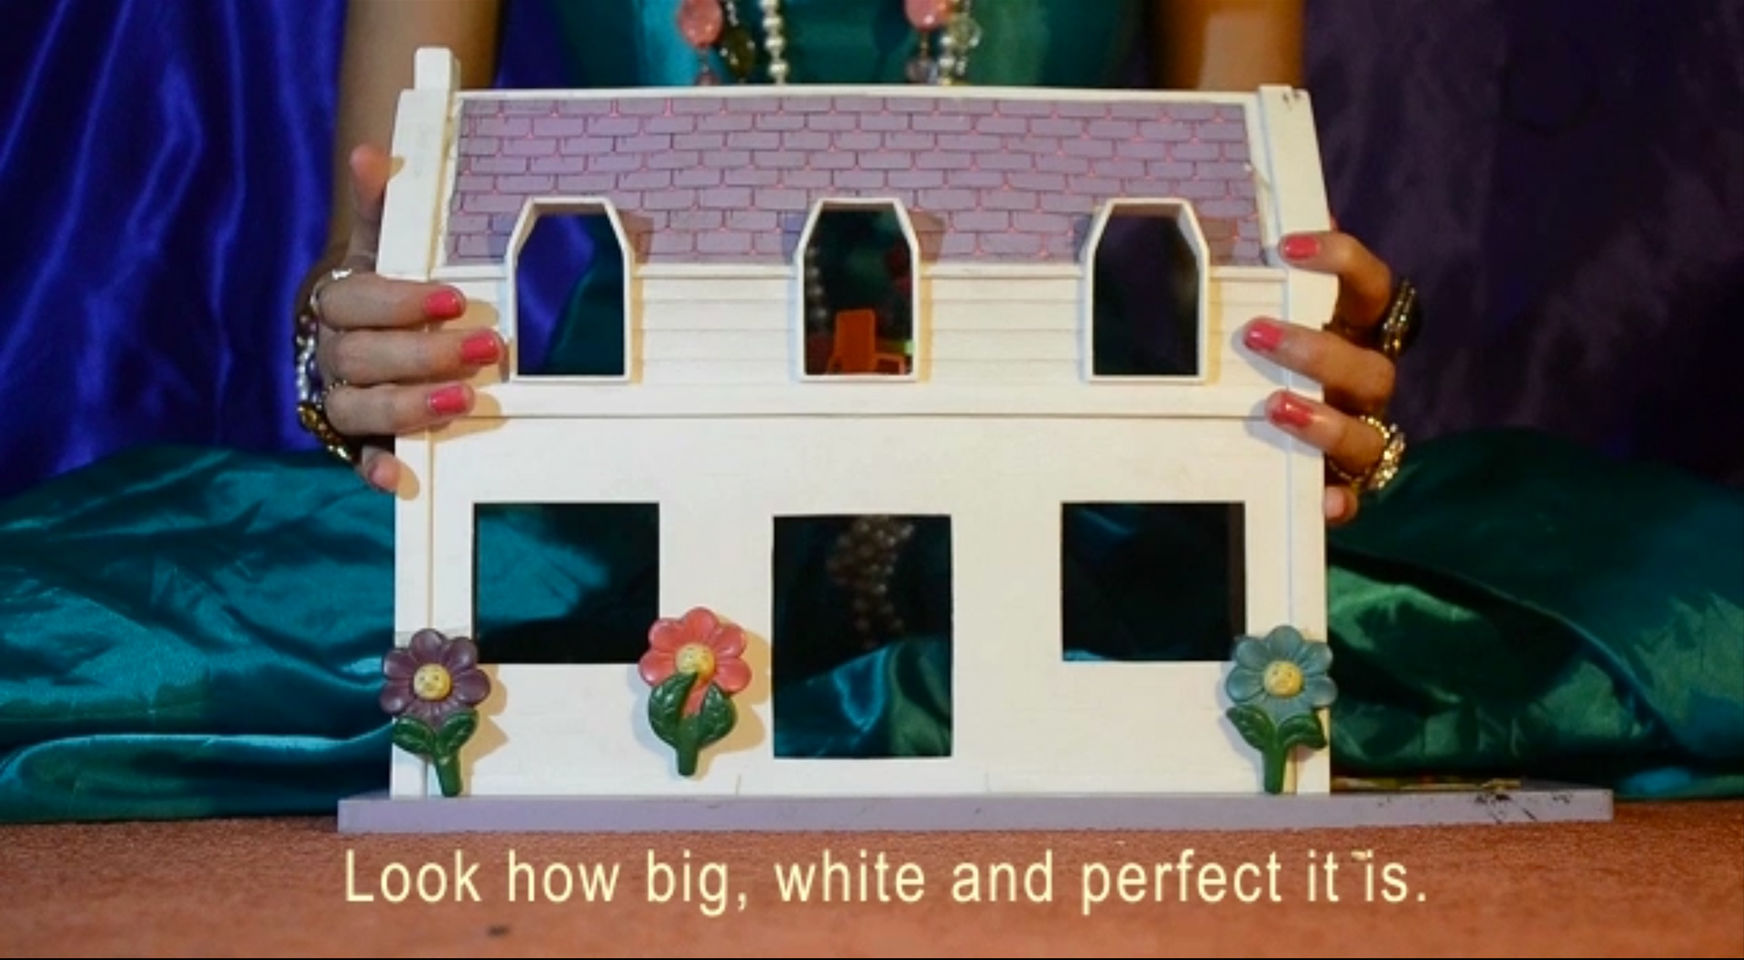 A video still featuring a white doll house with a woman sat behind it